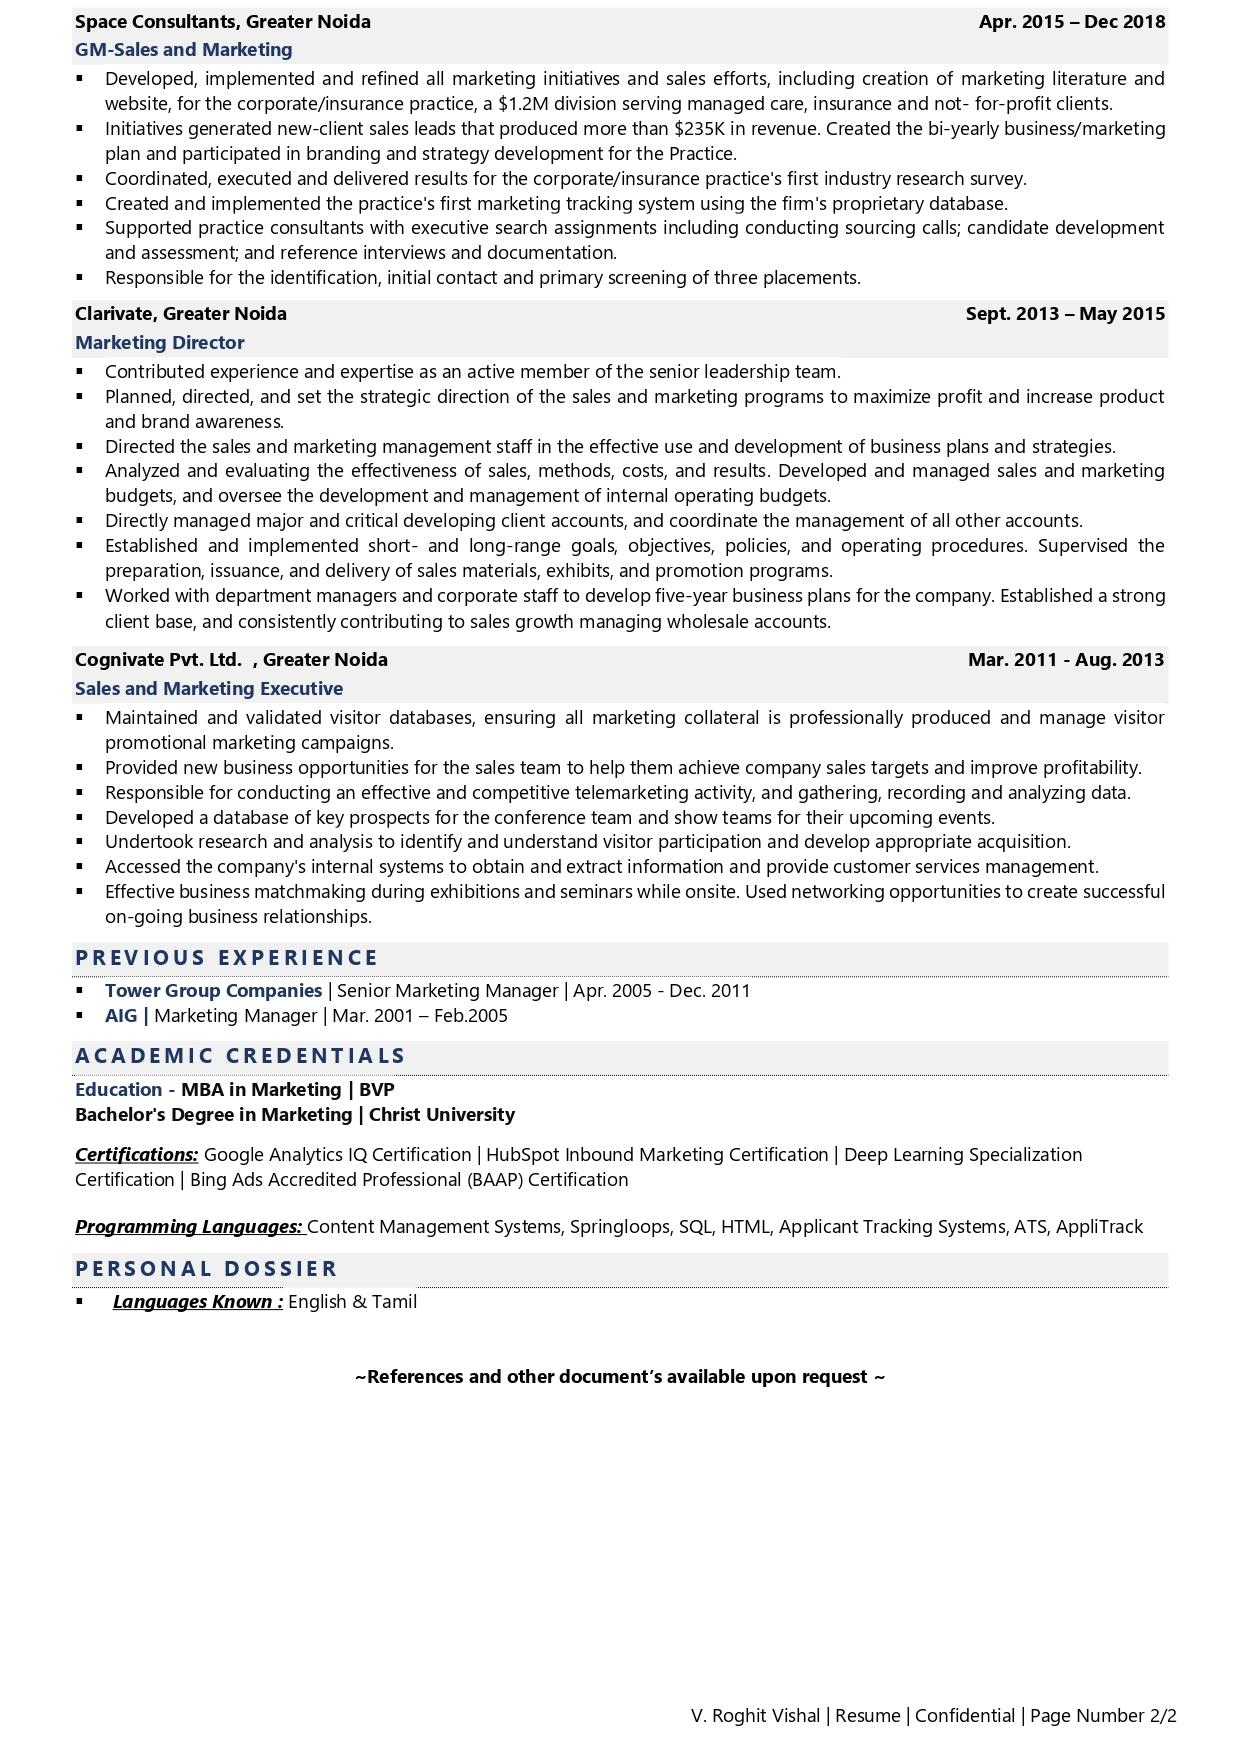 GM – Sales & Marketing - Resume Example & Template